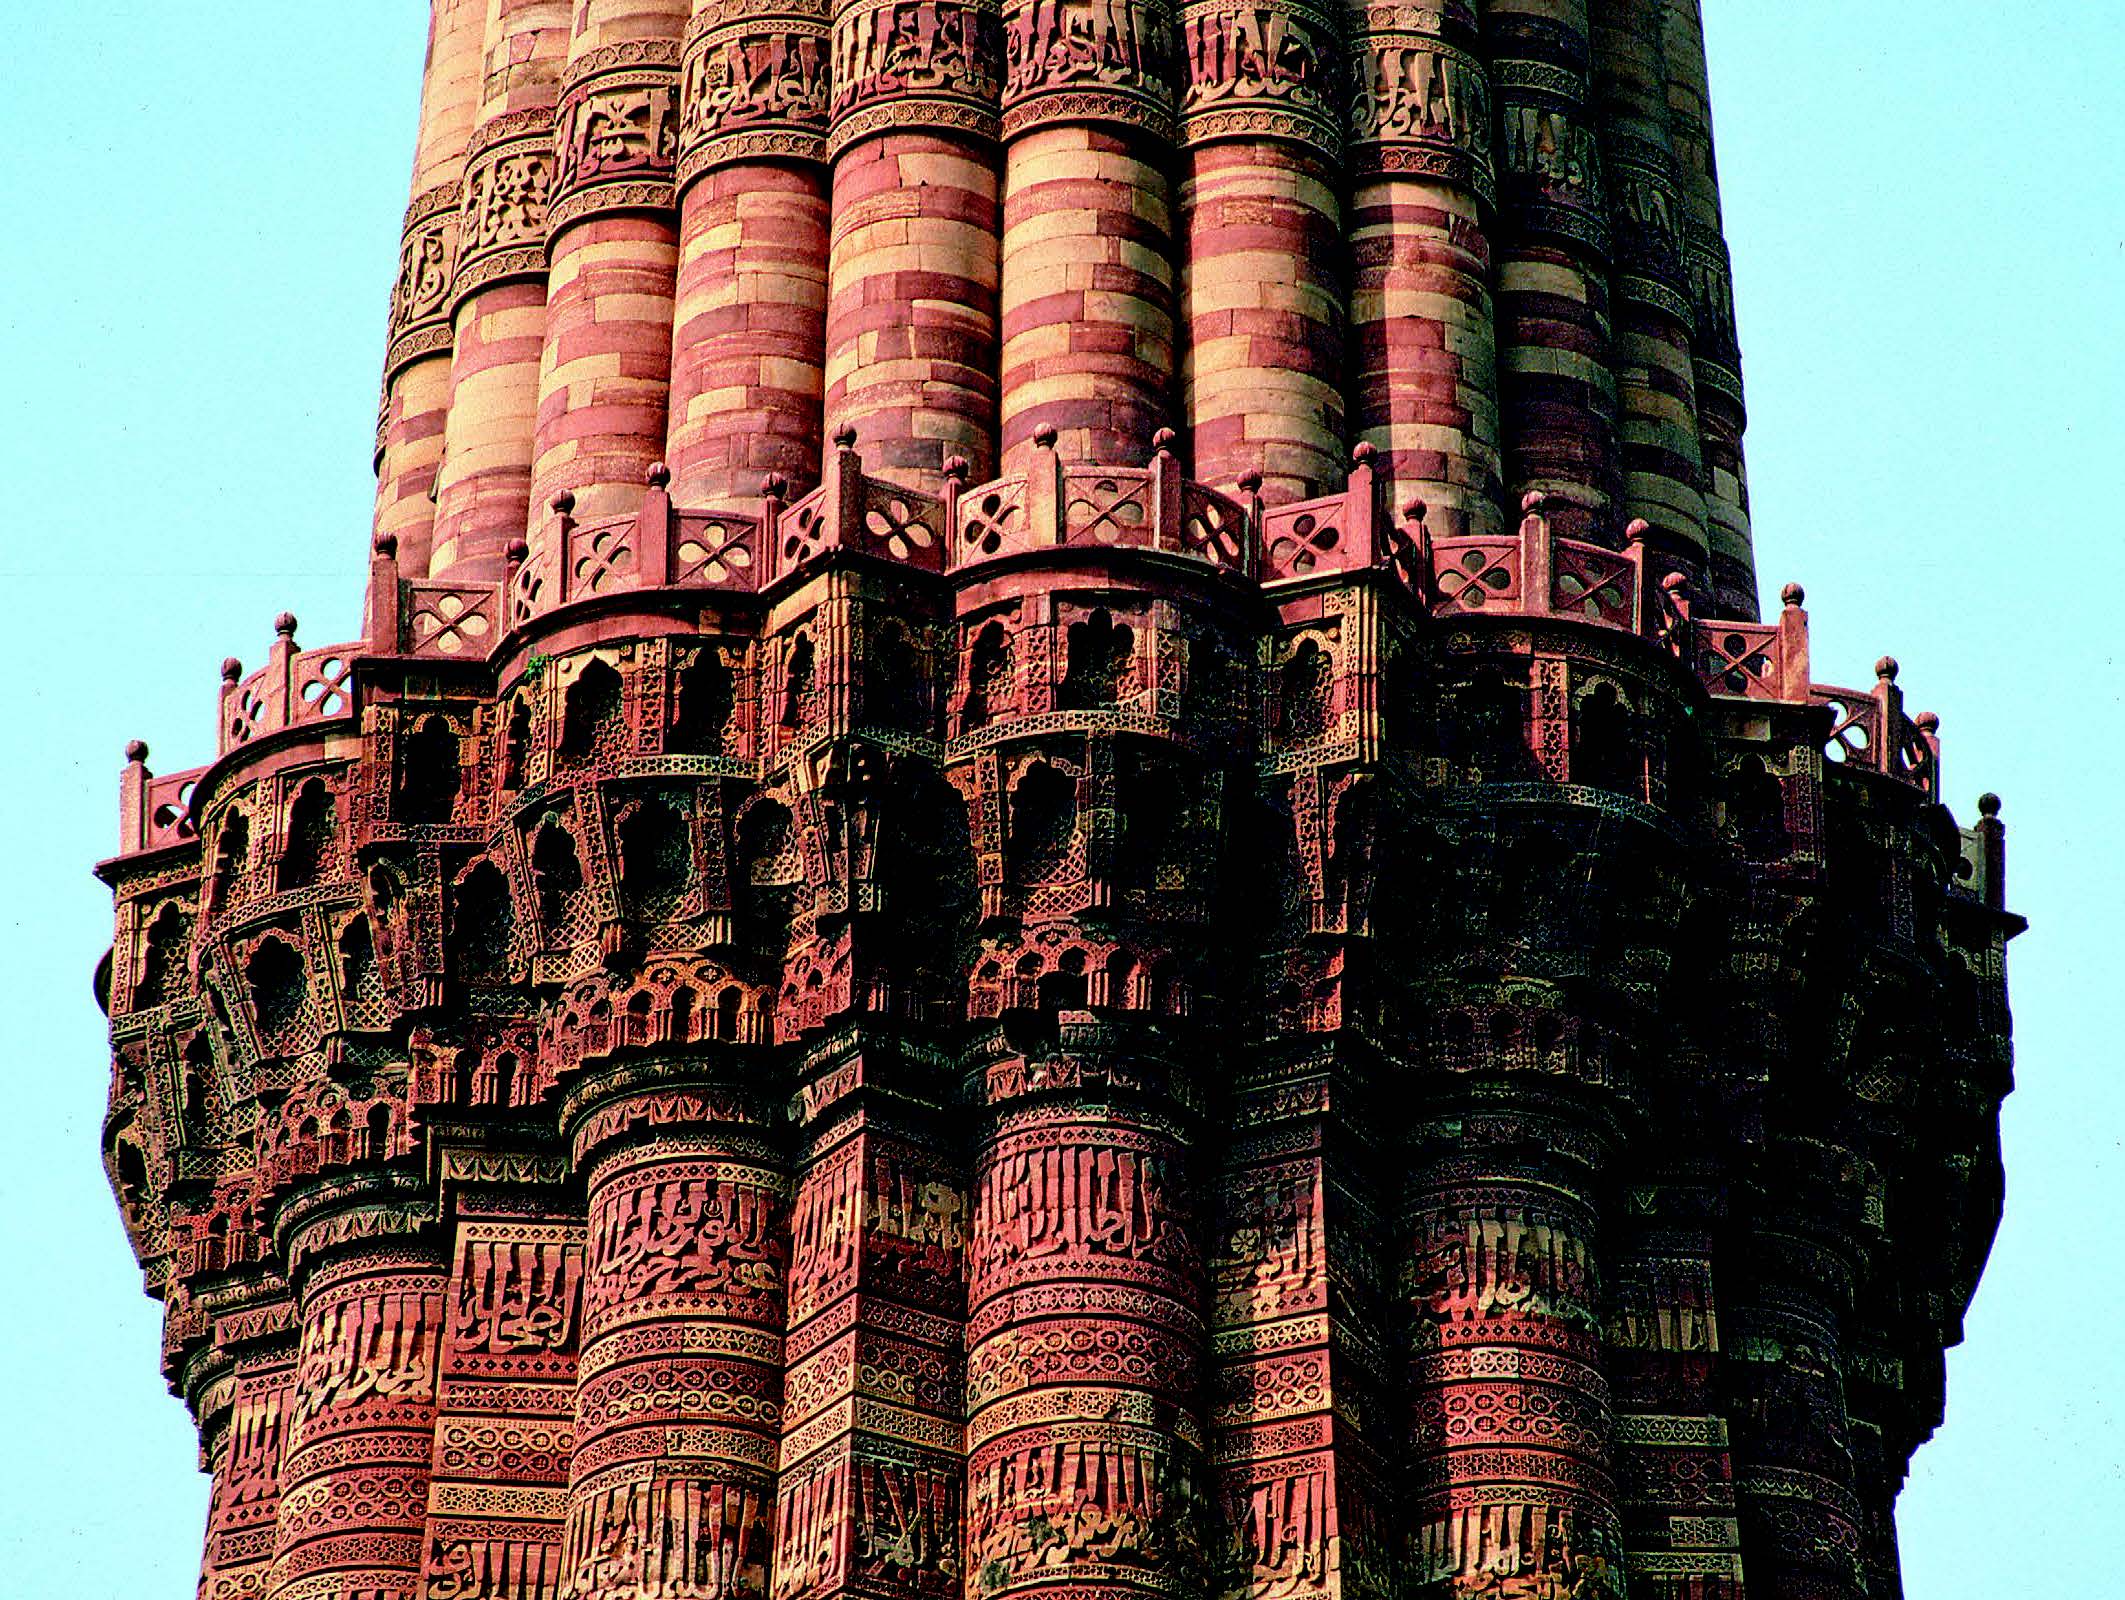 DELHI, INDIA: QUTB MINAR Begun in 1199 CE and rising 72 meters over the Quwwat al-Islam mosque, the Qutb Minar was built by Delhi’s first Muslim rulers. They modeled this minaret on earlier examples built of brick in Afghanistan, here translated into the local red sandstone. The exquisitely detailed muqarnas supporting the first of the minaret’s four balconies combines a traditional Islamic form with Indian styles of masonry.